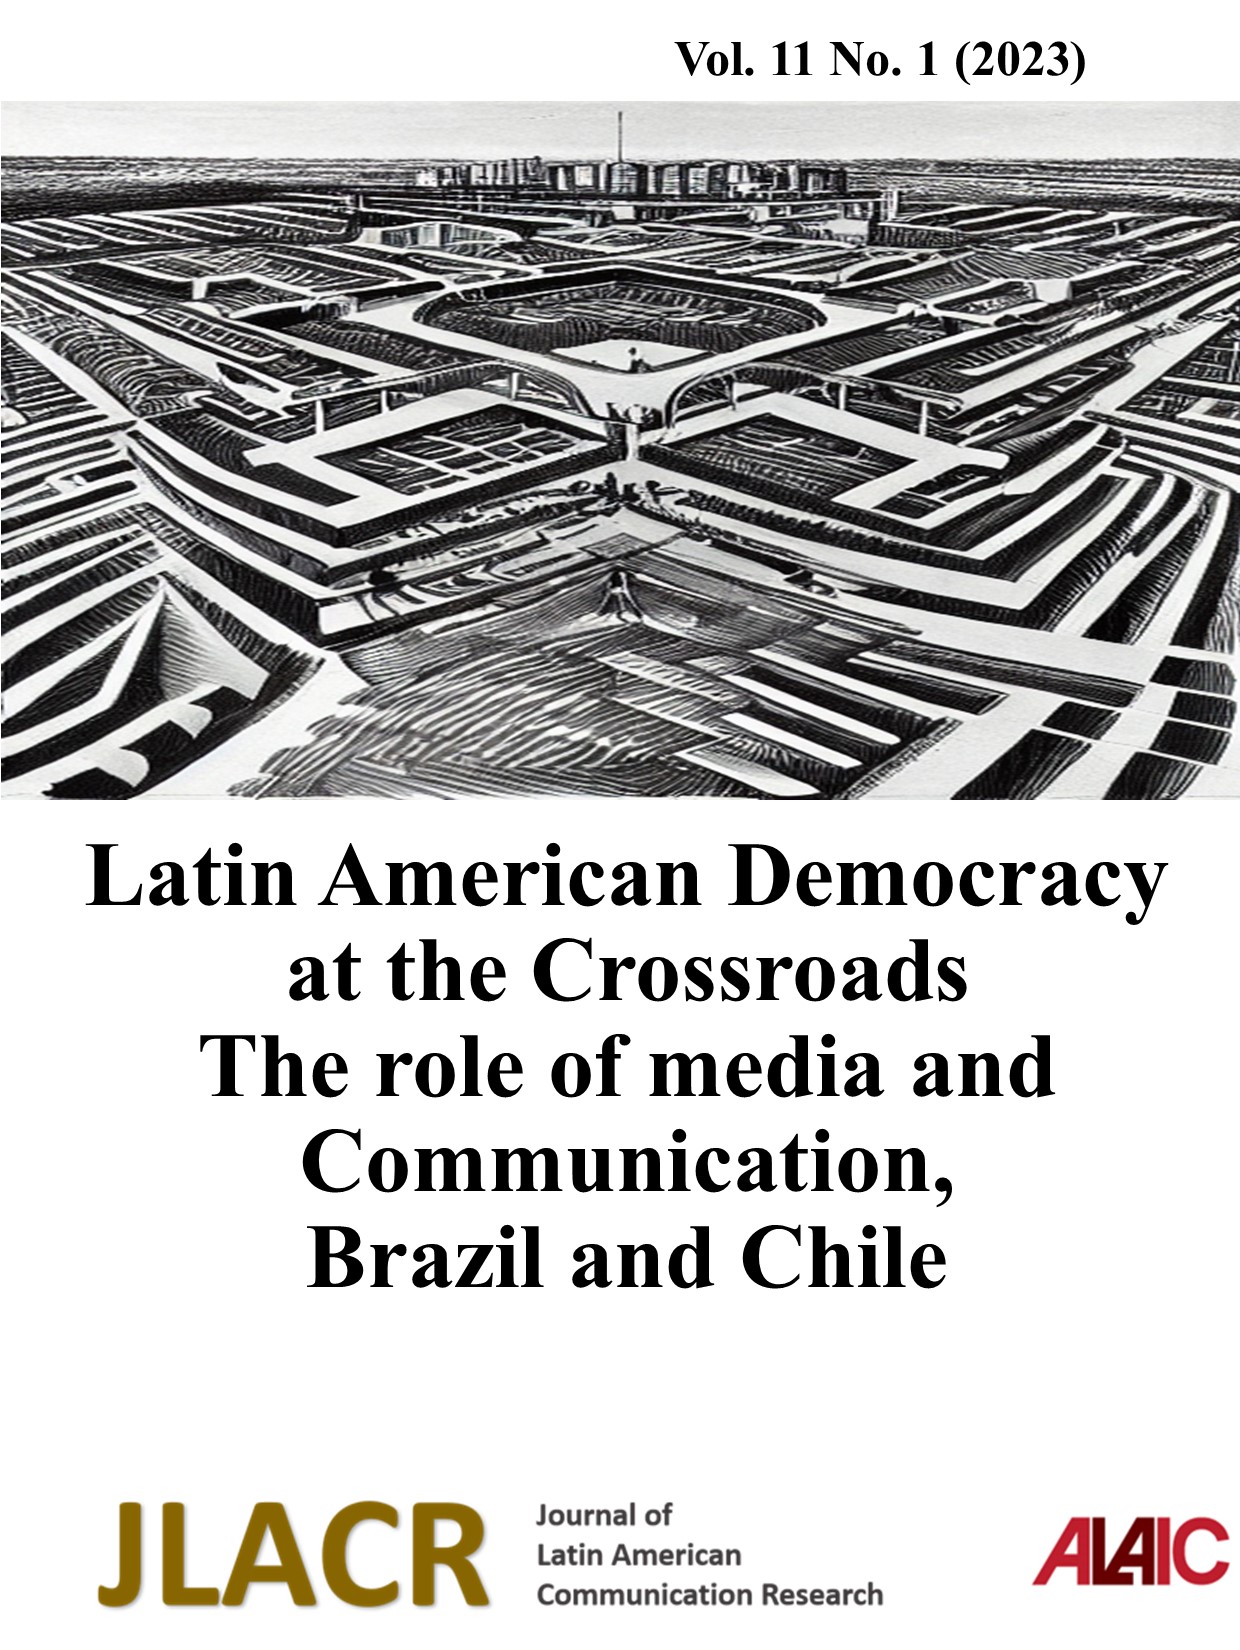 					View Vol. 11 No. 1 (2023): Latin American Democracy at the Crossroads, the role of media and communication: Brazil and Chile 
				